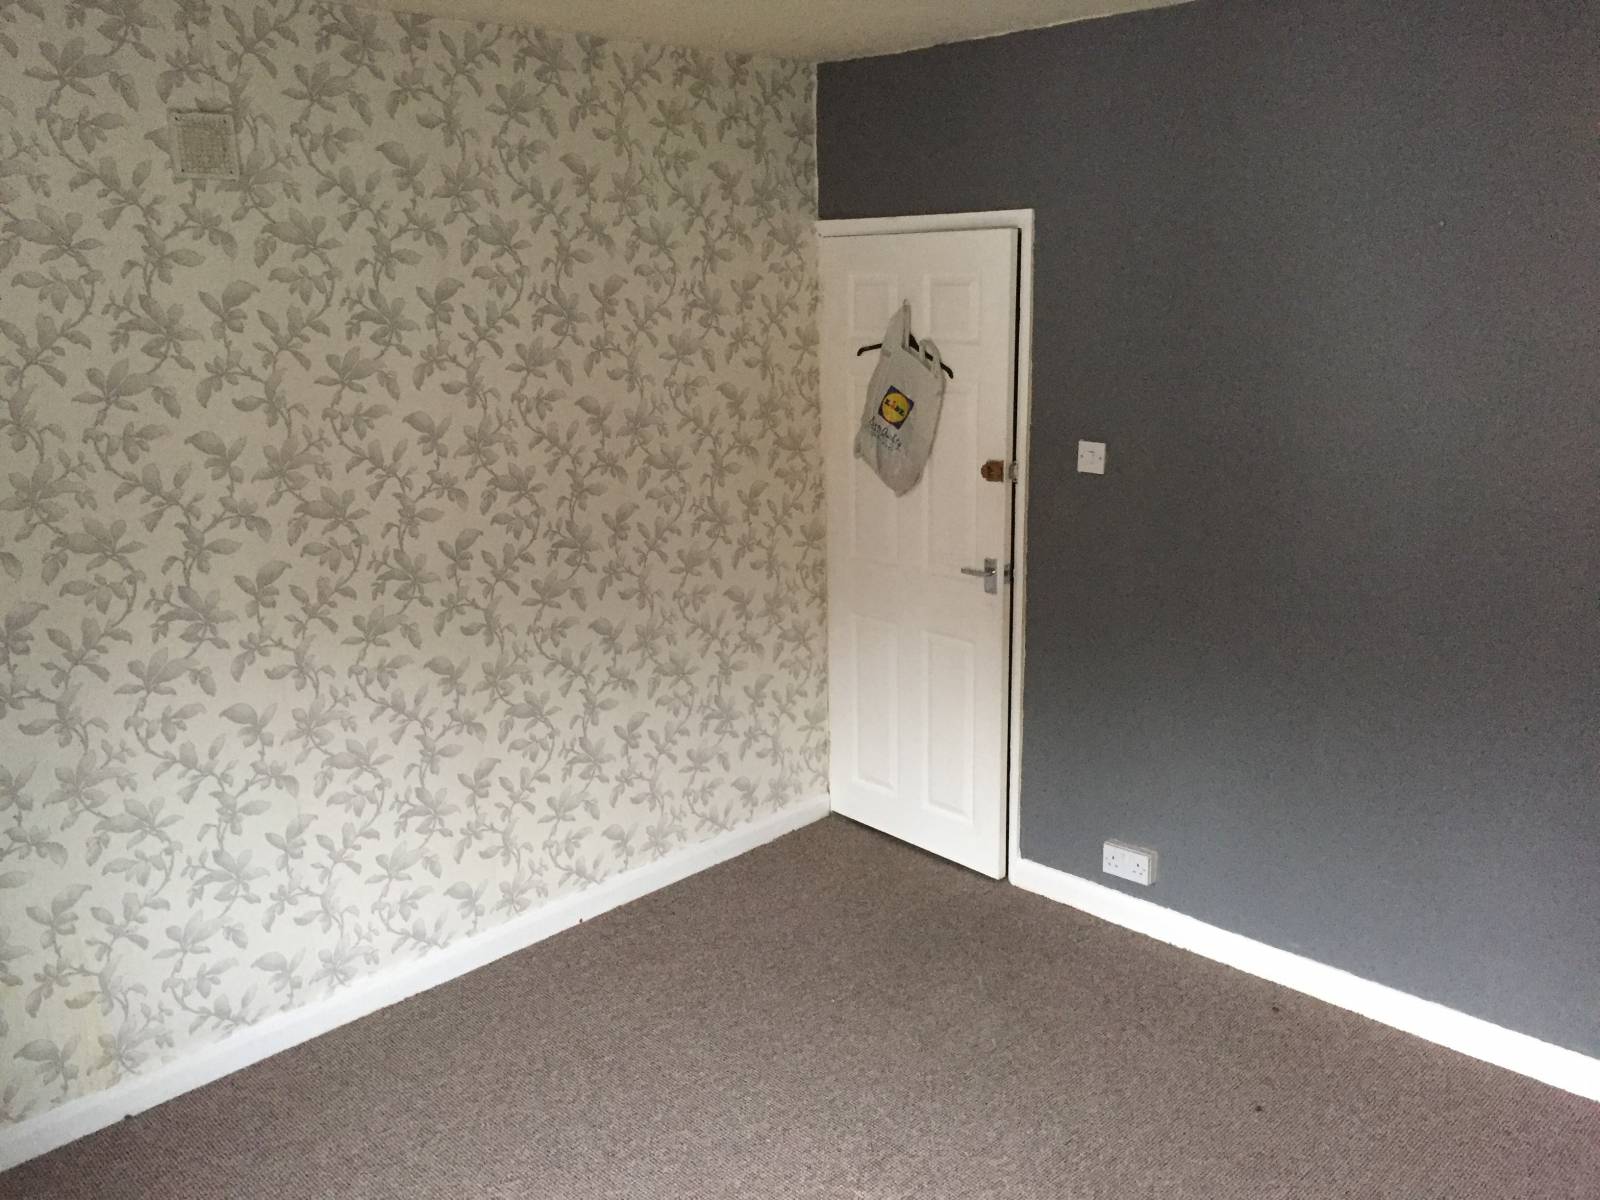 2 bedroom End Terraced. Private Yard. Large Rooms